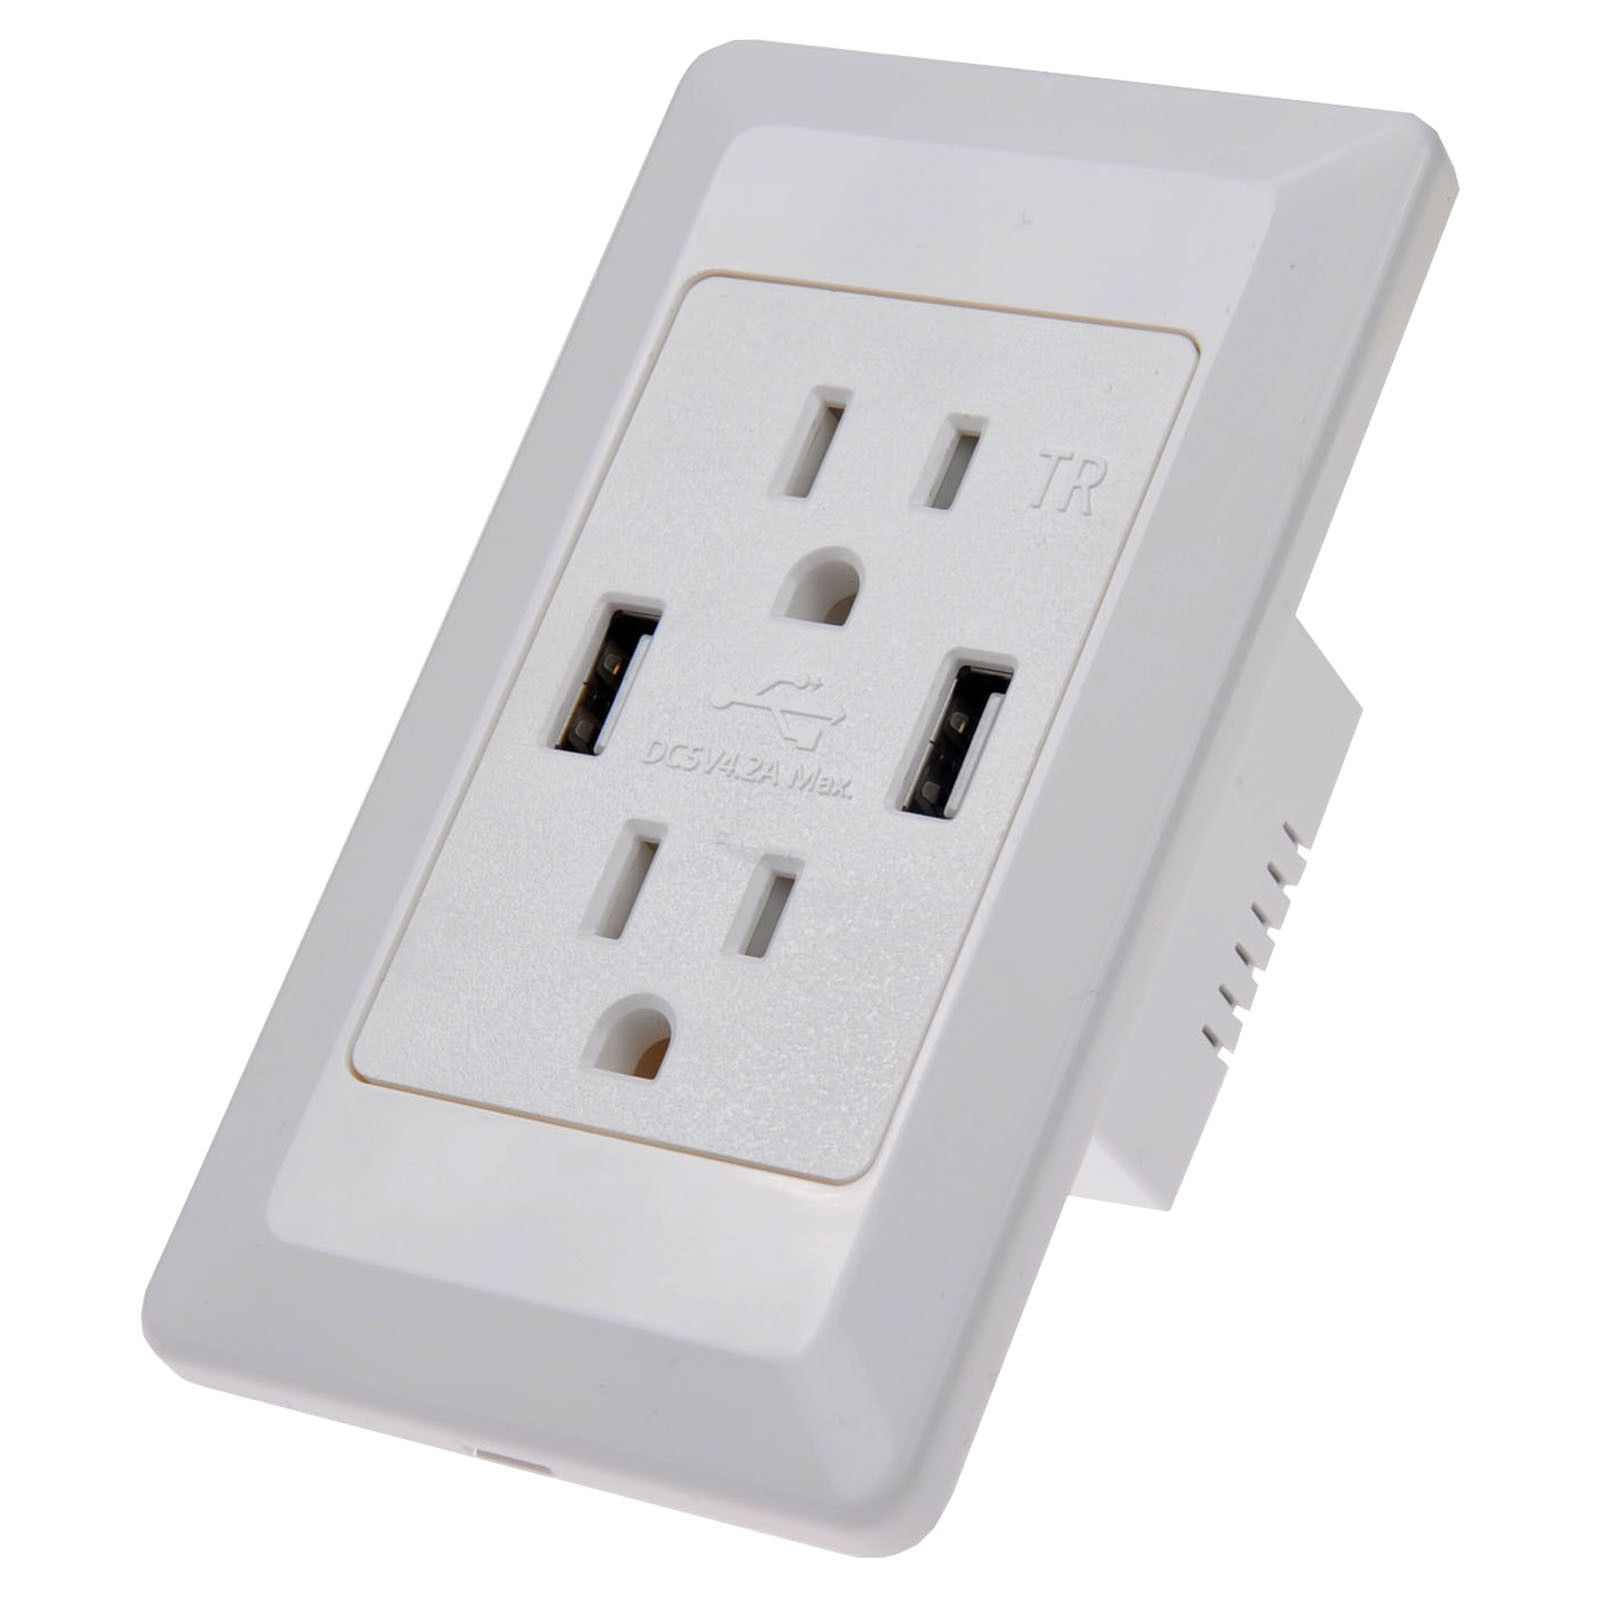 New Electrical USB Charger Wall Outlet - 4 Amp Dual USB High Speed Fast ...